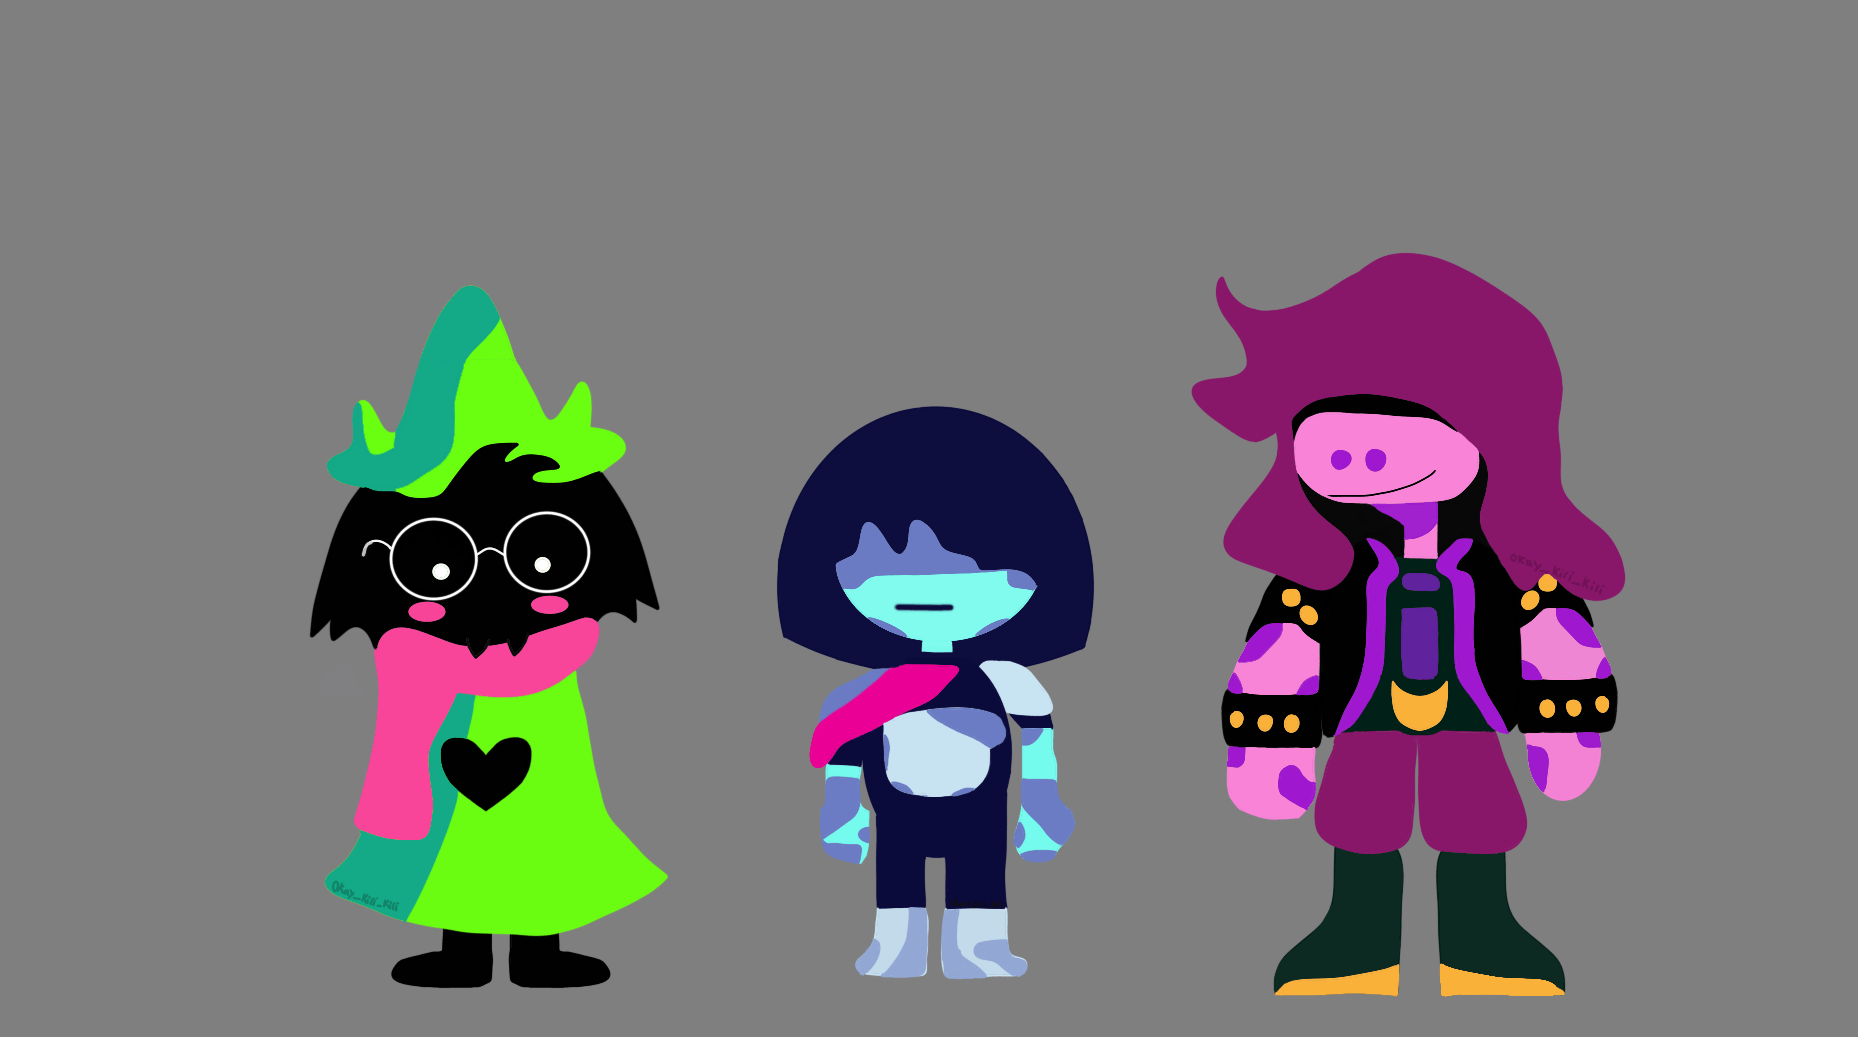 Wallpaper with Raelsi, Kris, and Susie!